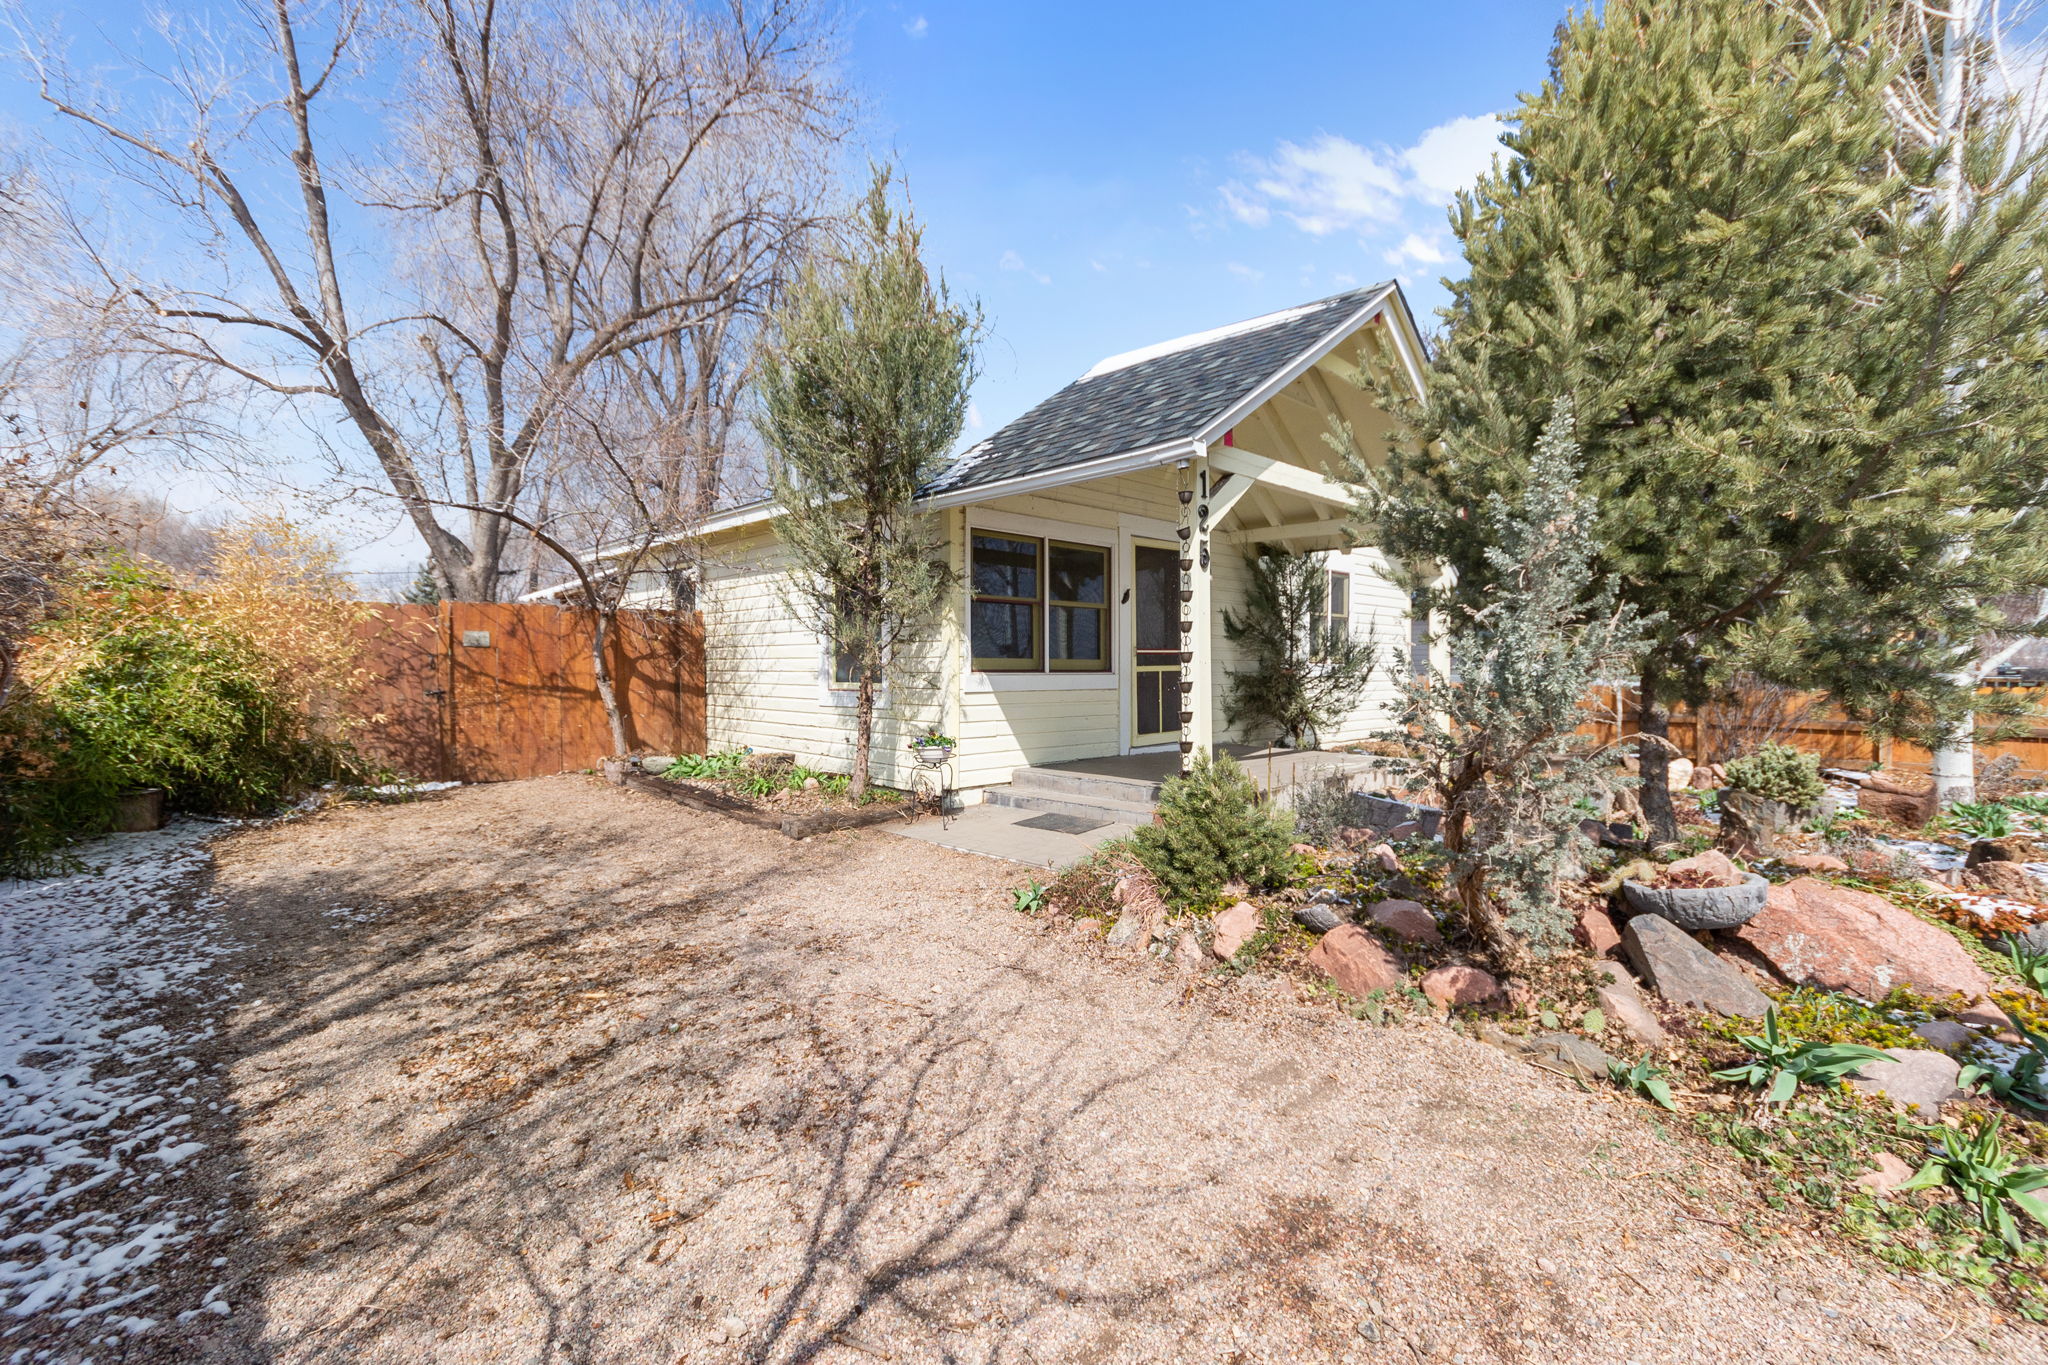  125 3rd St, Fort Collins, CO 80524, US Photo 4